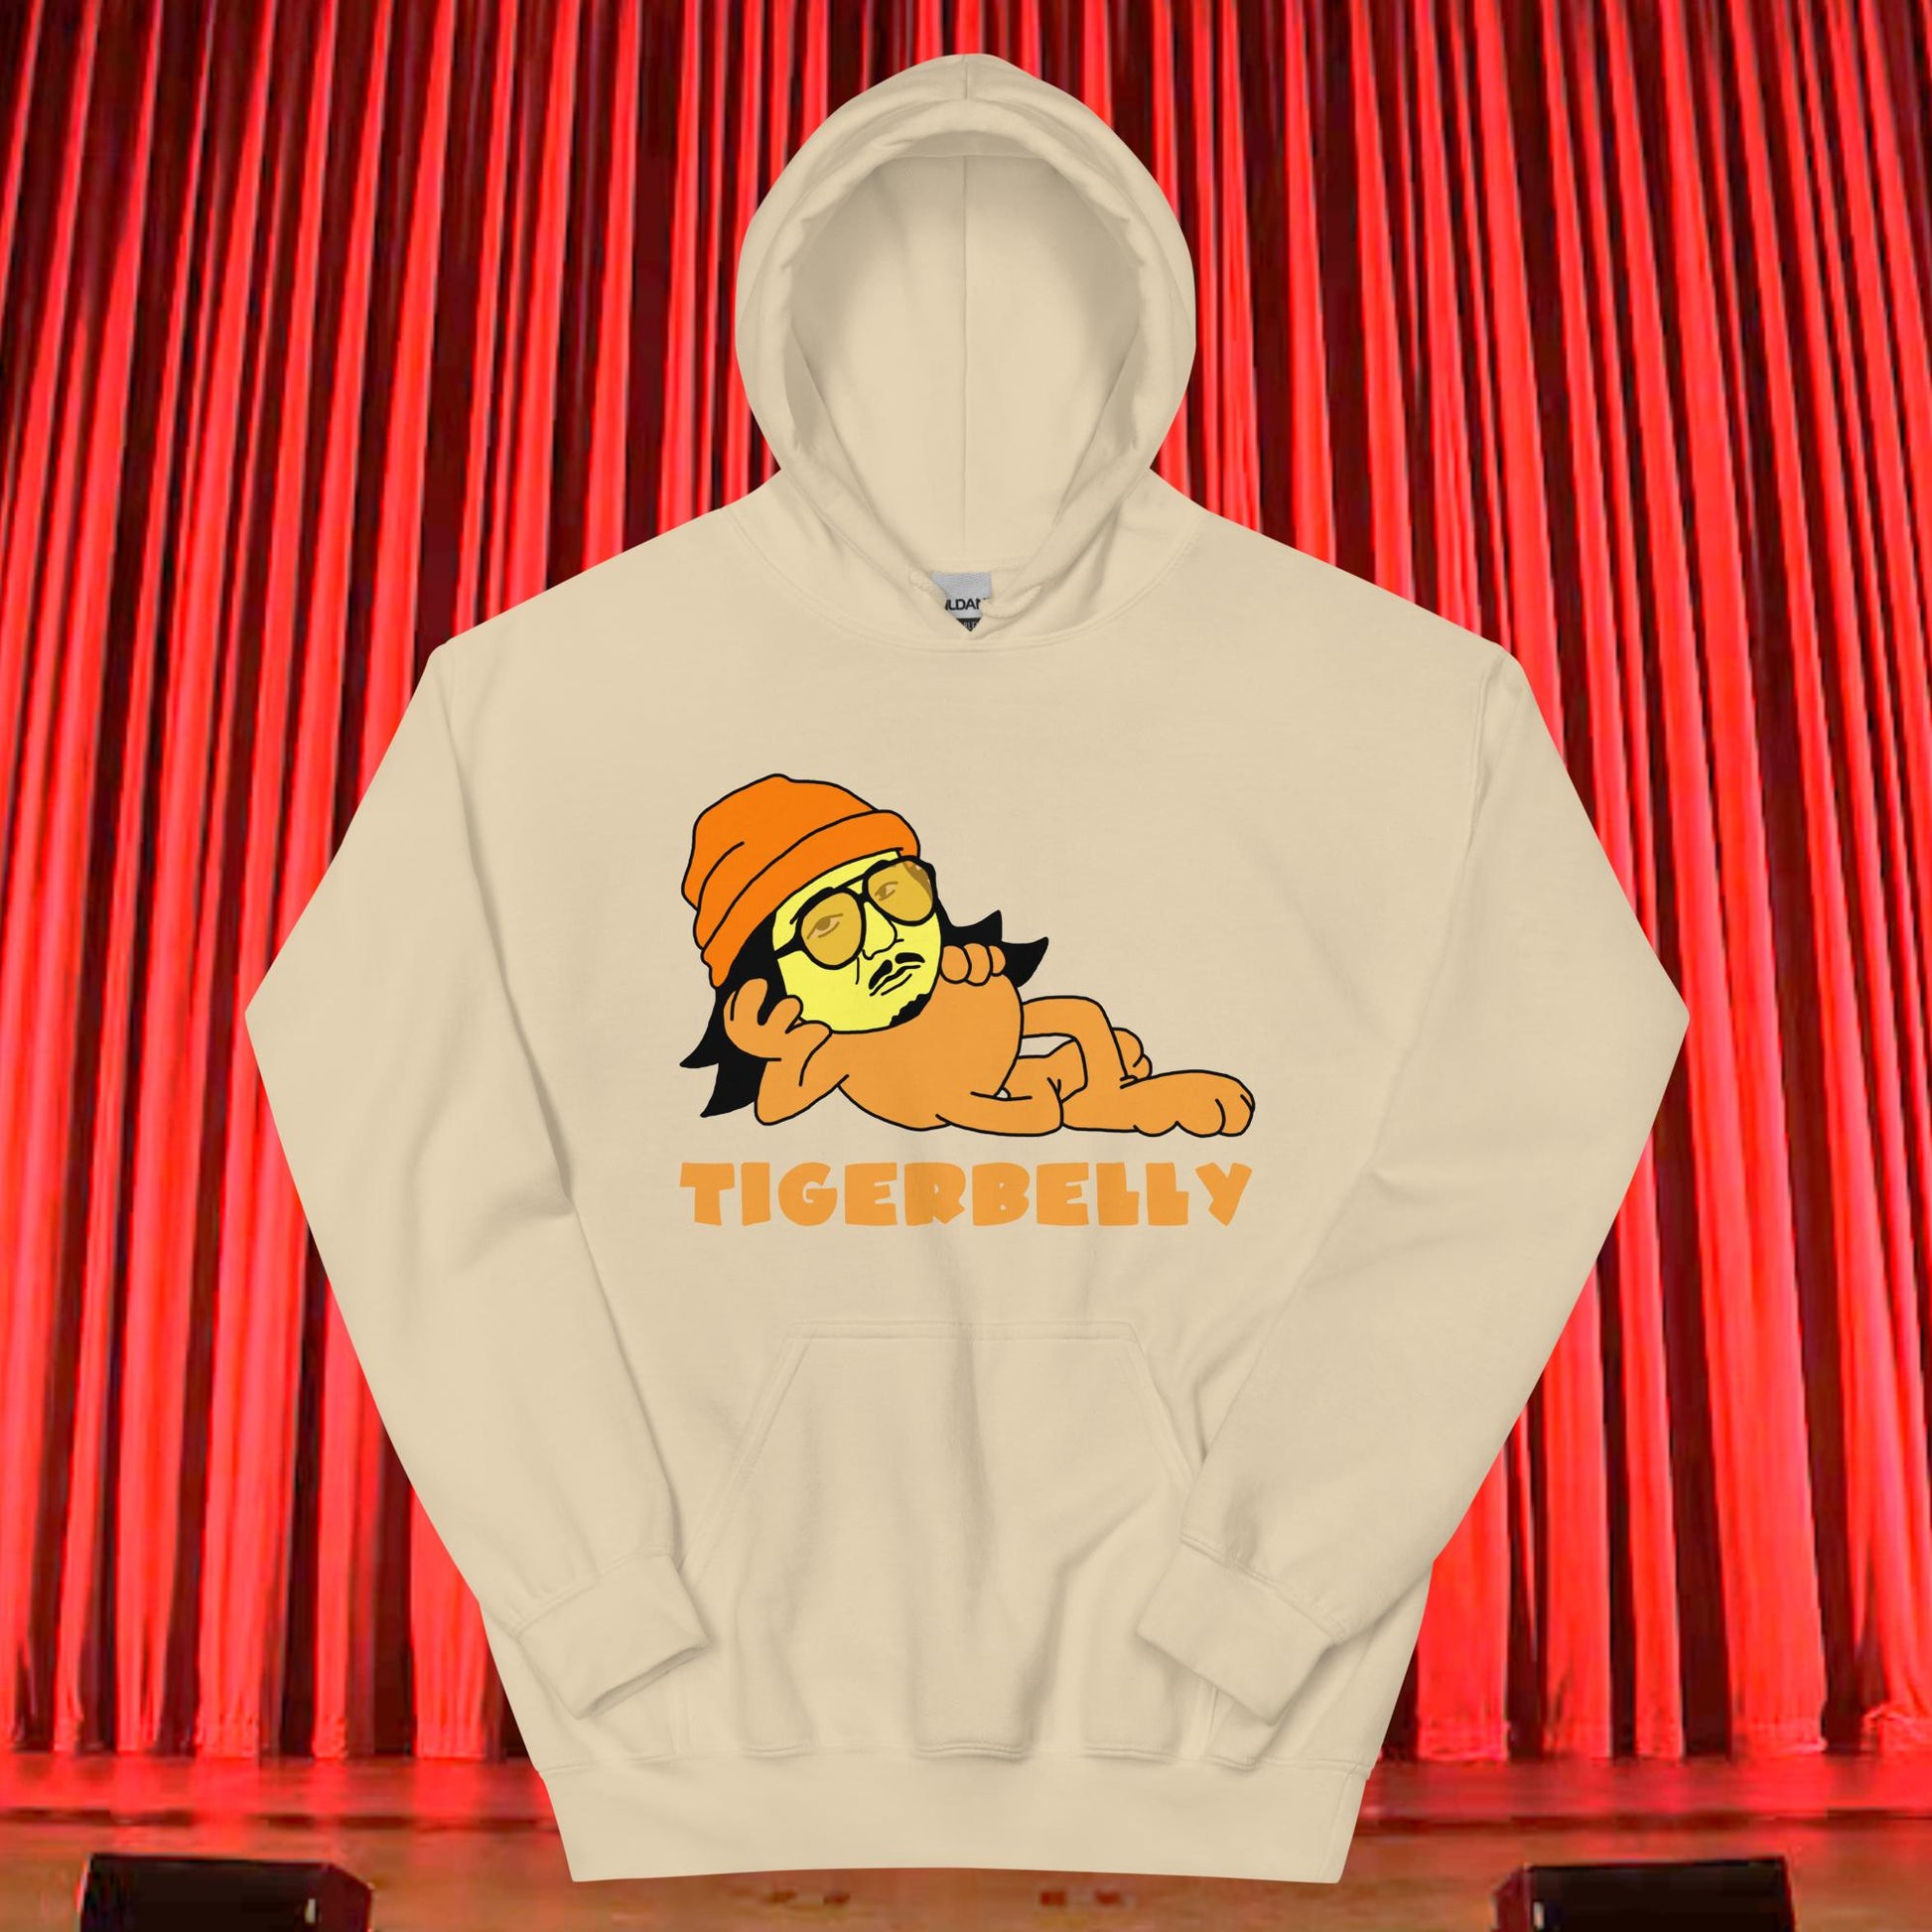 Bobby Lee Tigerbelly, Bobby Lee Merch, Tigerbelly Merch, Bobby Lee Gift, Funny Tigerbelly Gift, Tigerbelly Podcast, TigerBelly Unisex Hoodie Next Cult Brand Bobby Lee, Podcasts, Stand-up Comedy, TigerBelly